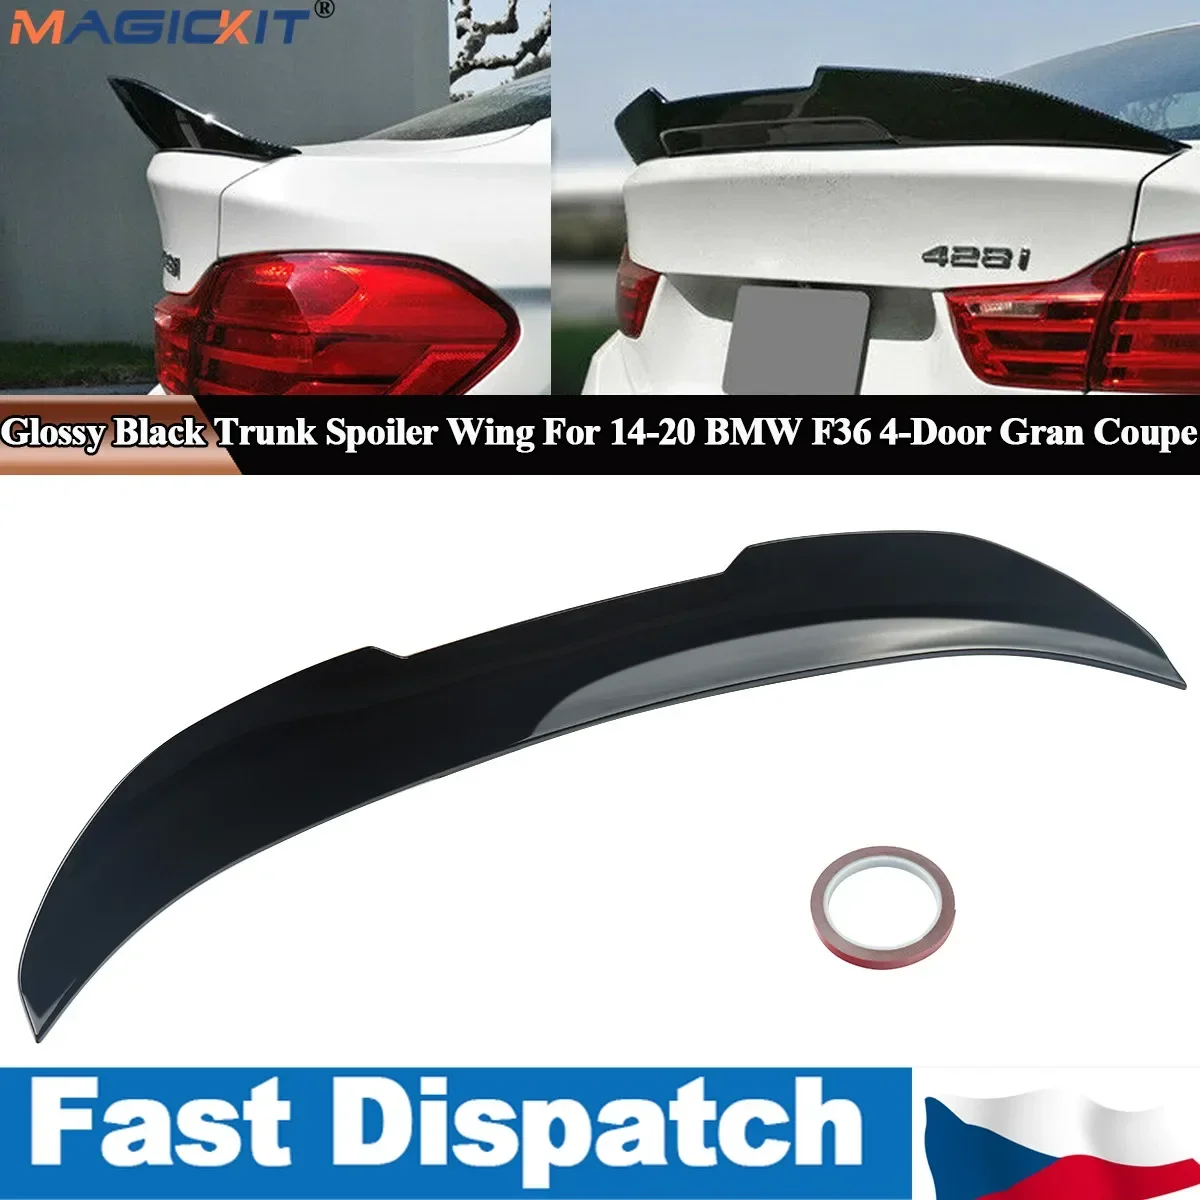 

MagicKit Gloss Black PSM Style Rear Boot Spoiler for BMW 4 Series F36 Gran Coupe 14-21